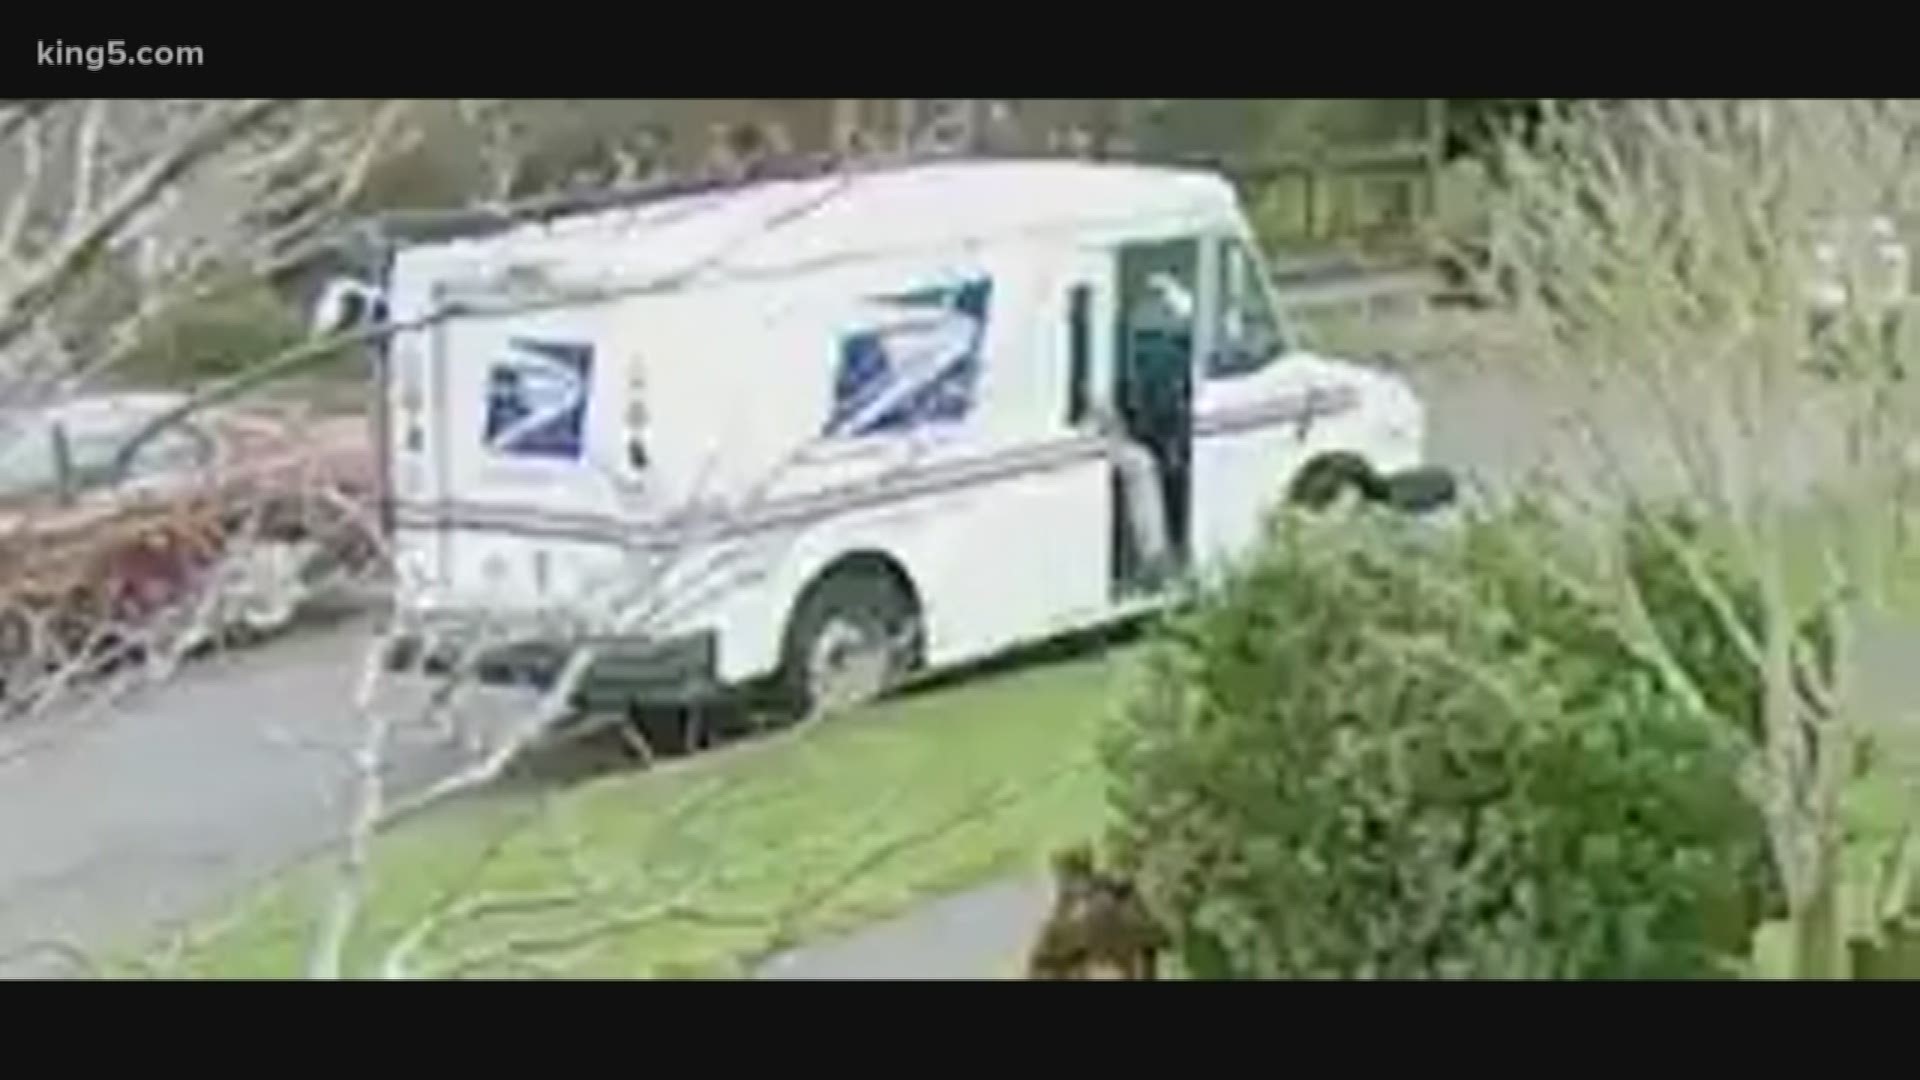 More than 200 pieces of mail are missing after someone stole a USPS delivery truck in West Seattle